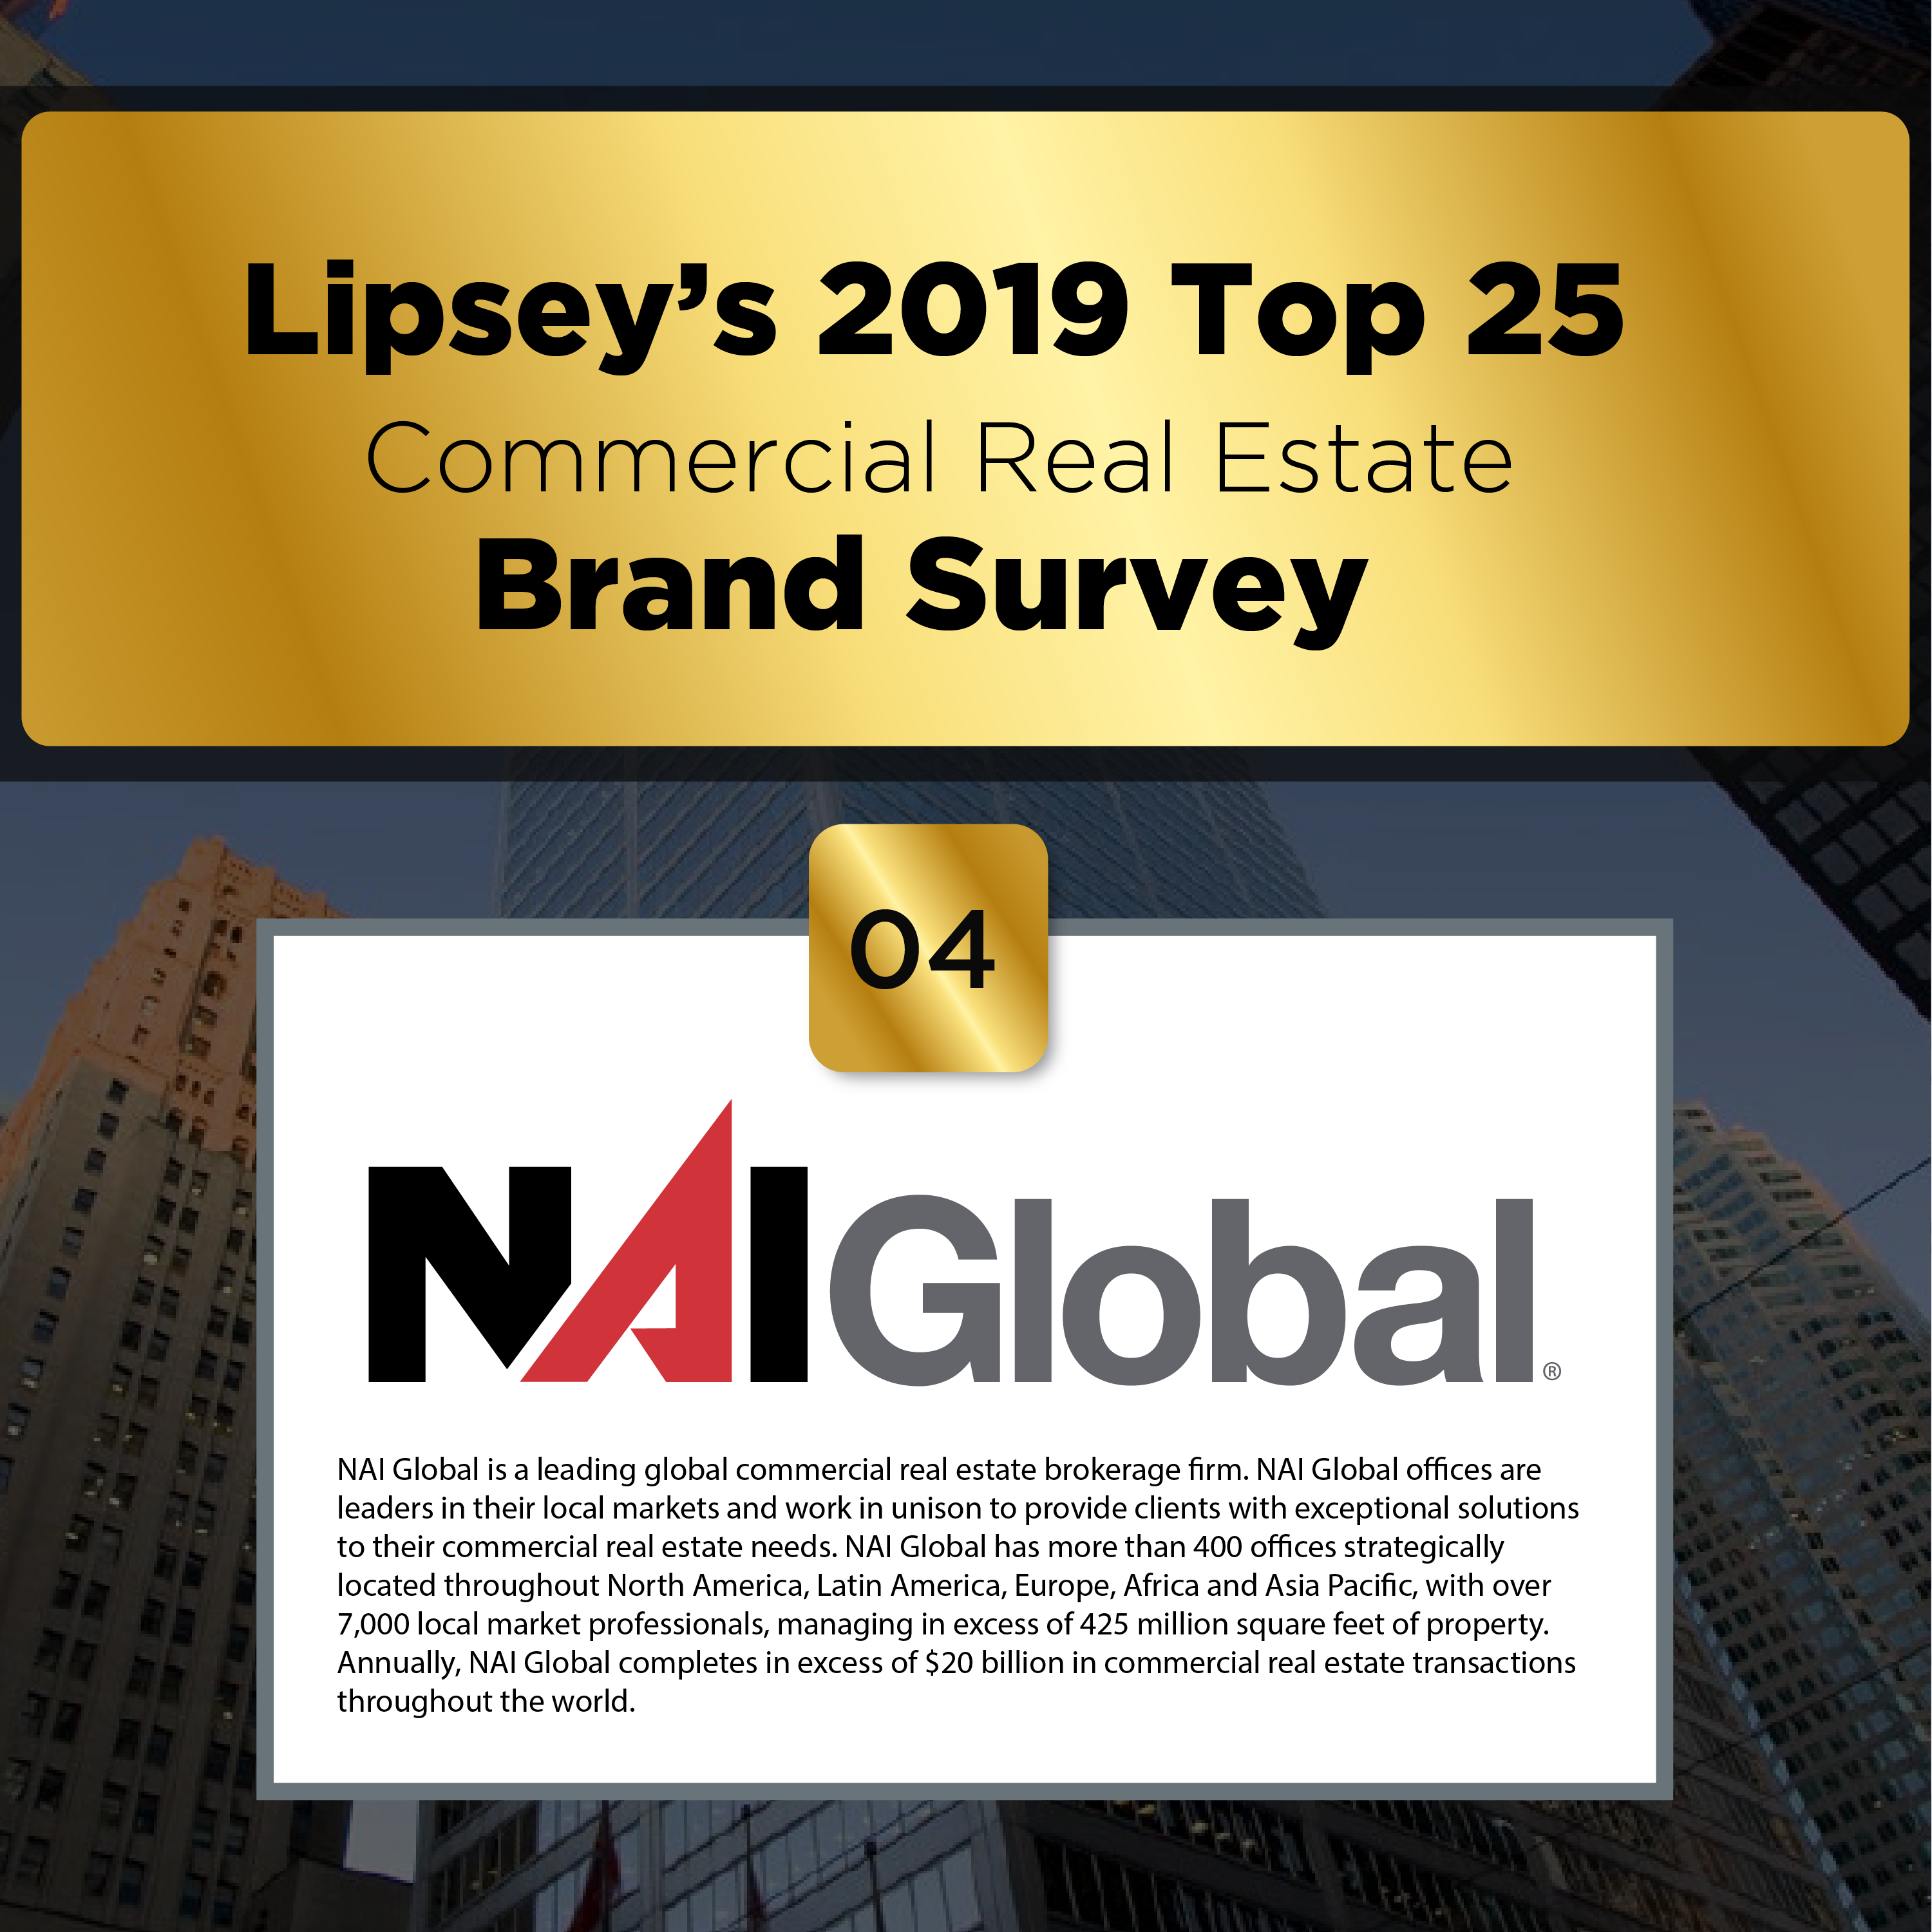 NAI Global ranked 4th in Lipsey's Top 25 Commercial Real Estate Brands Survey